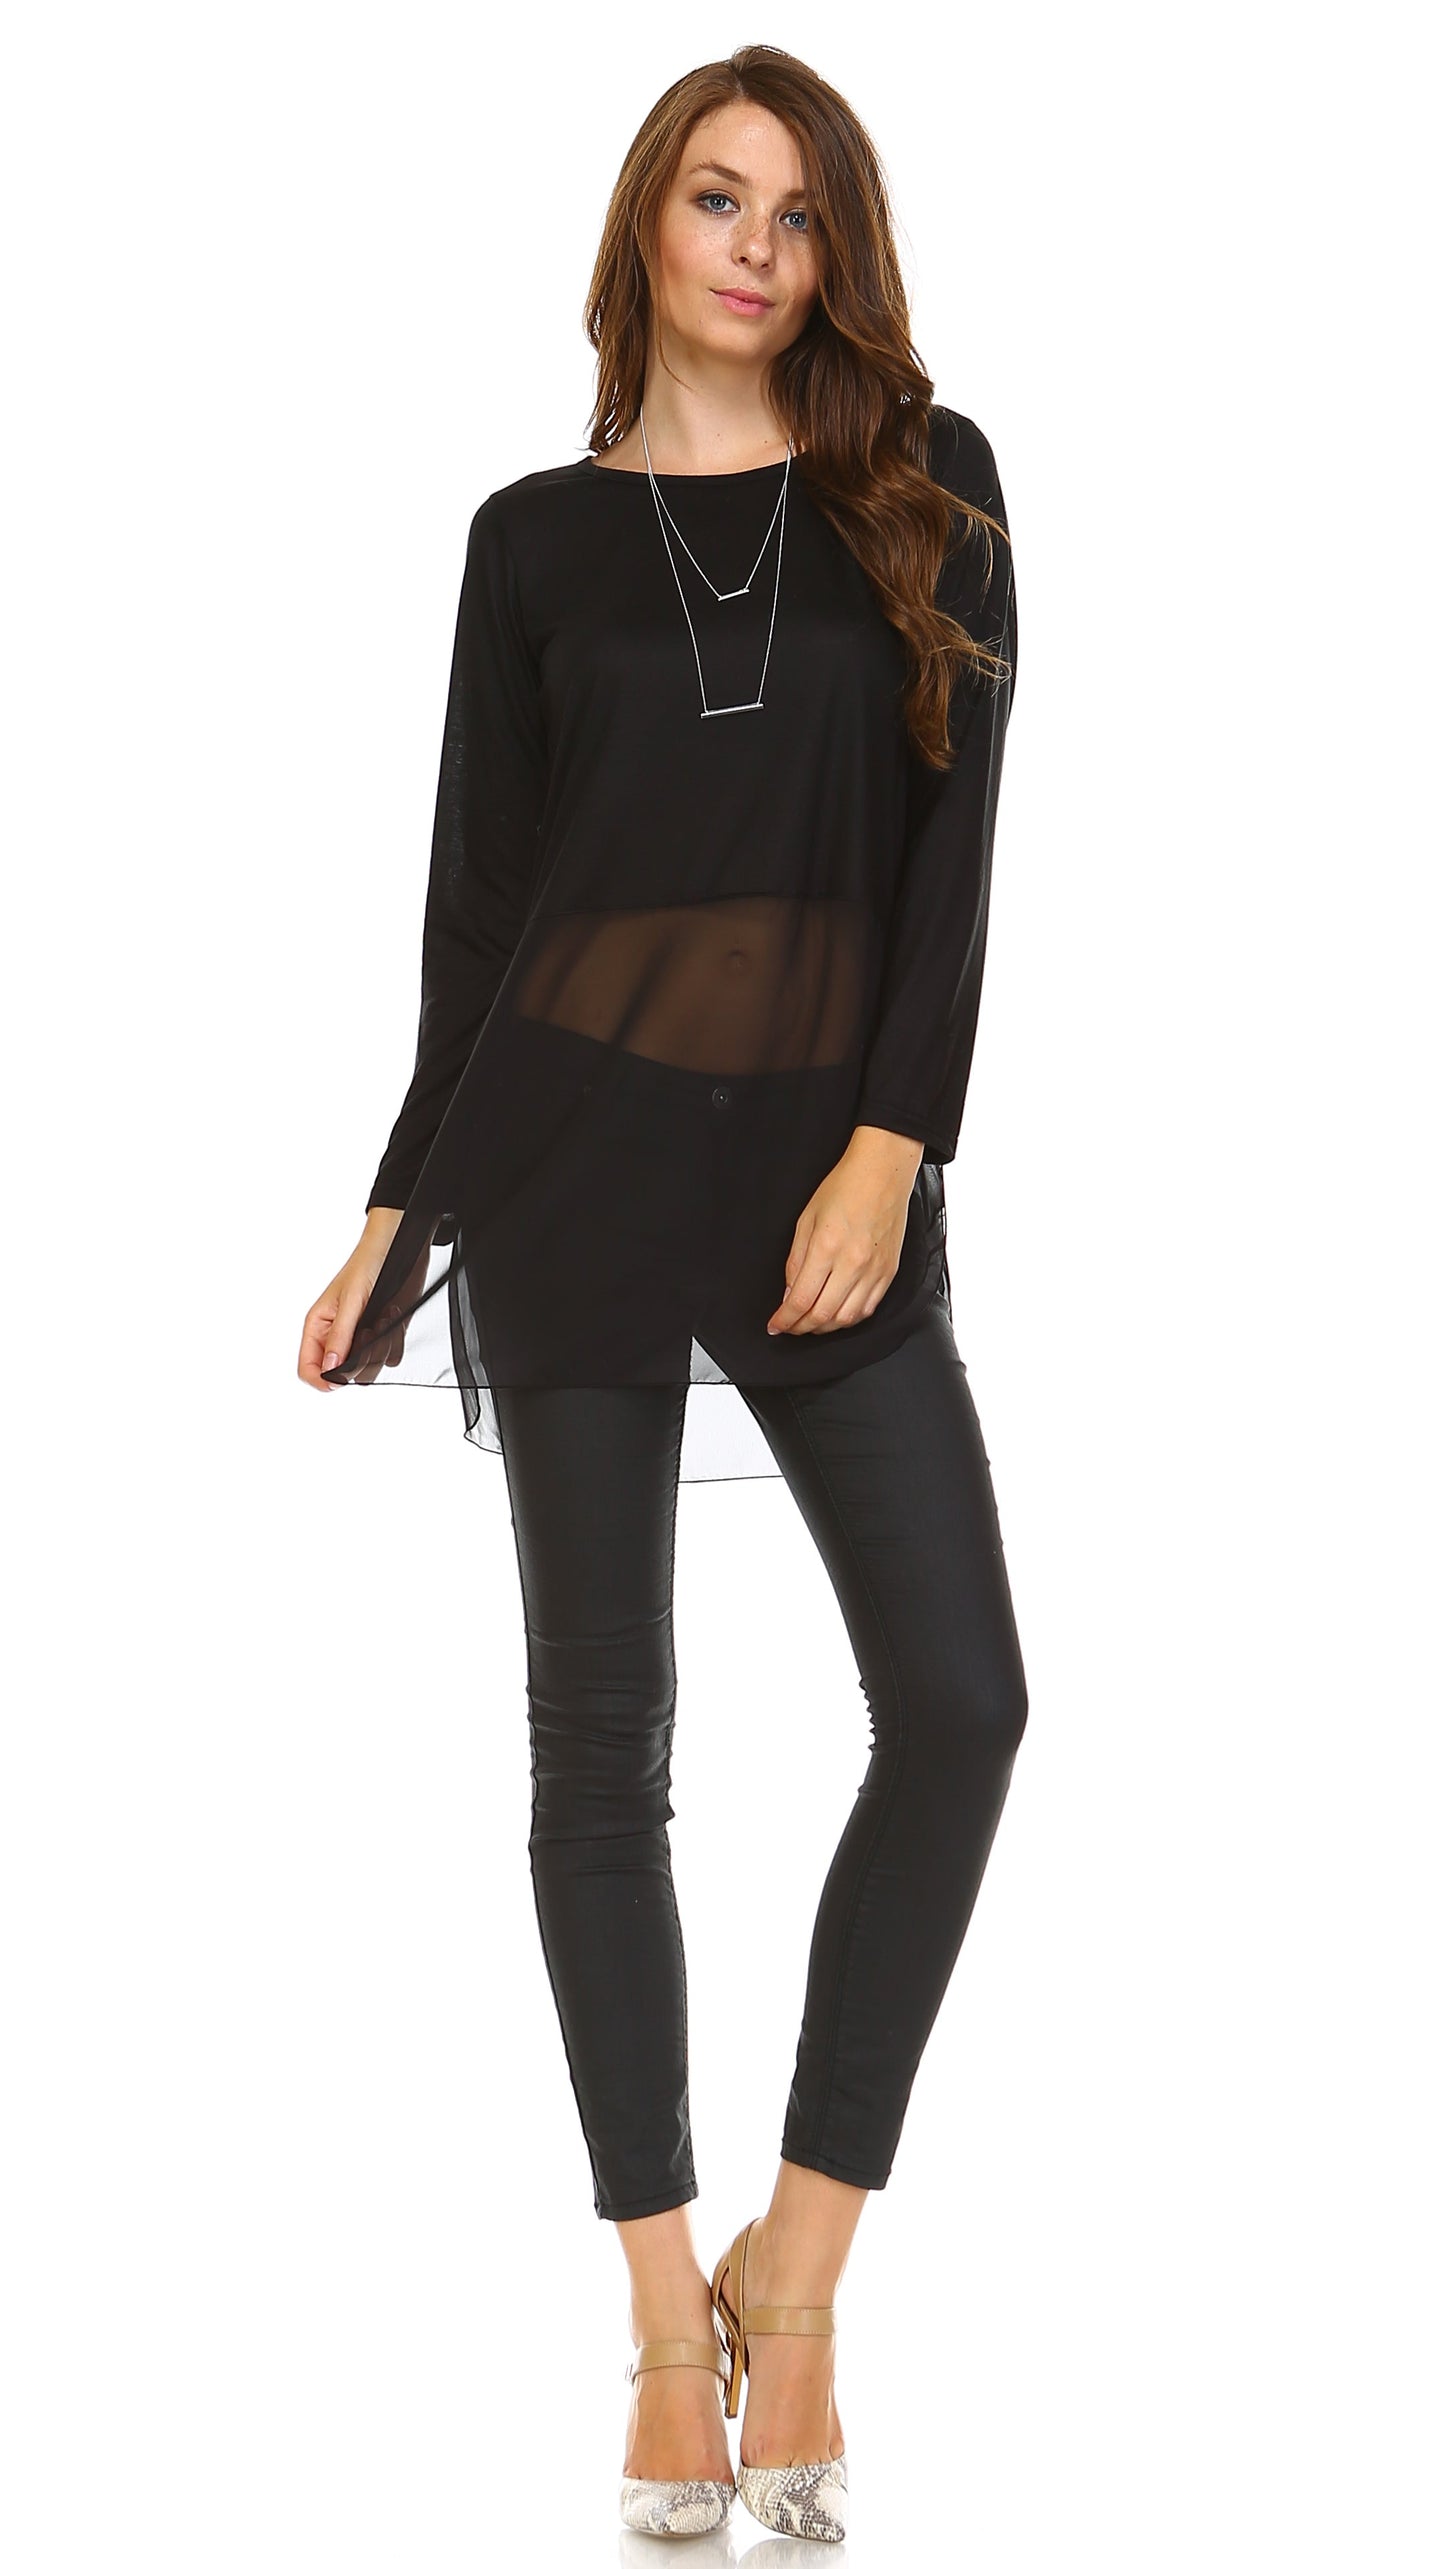 Women's Long Sleeve Round Neck Top Extender with Sheer Chiffon Bottom - Shop Lev